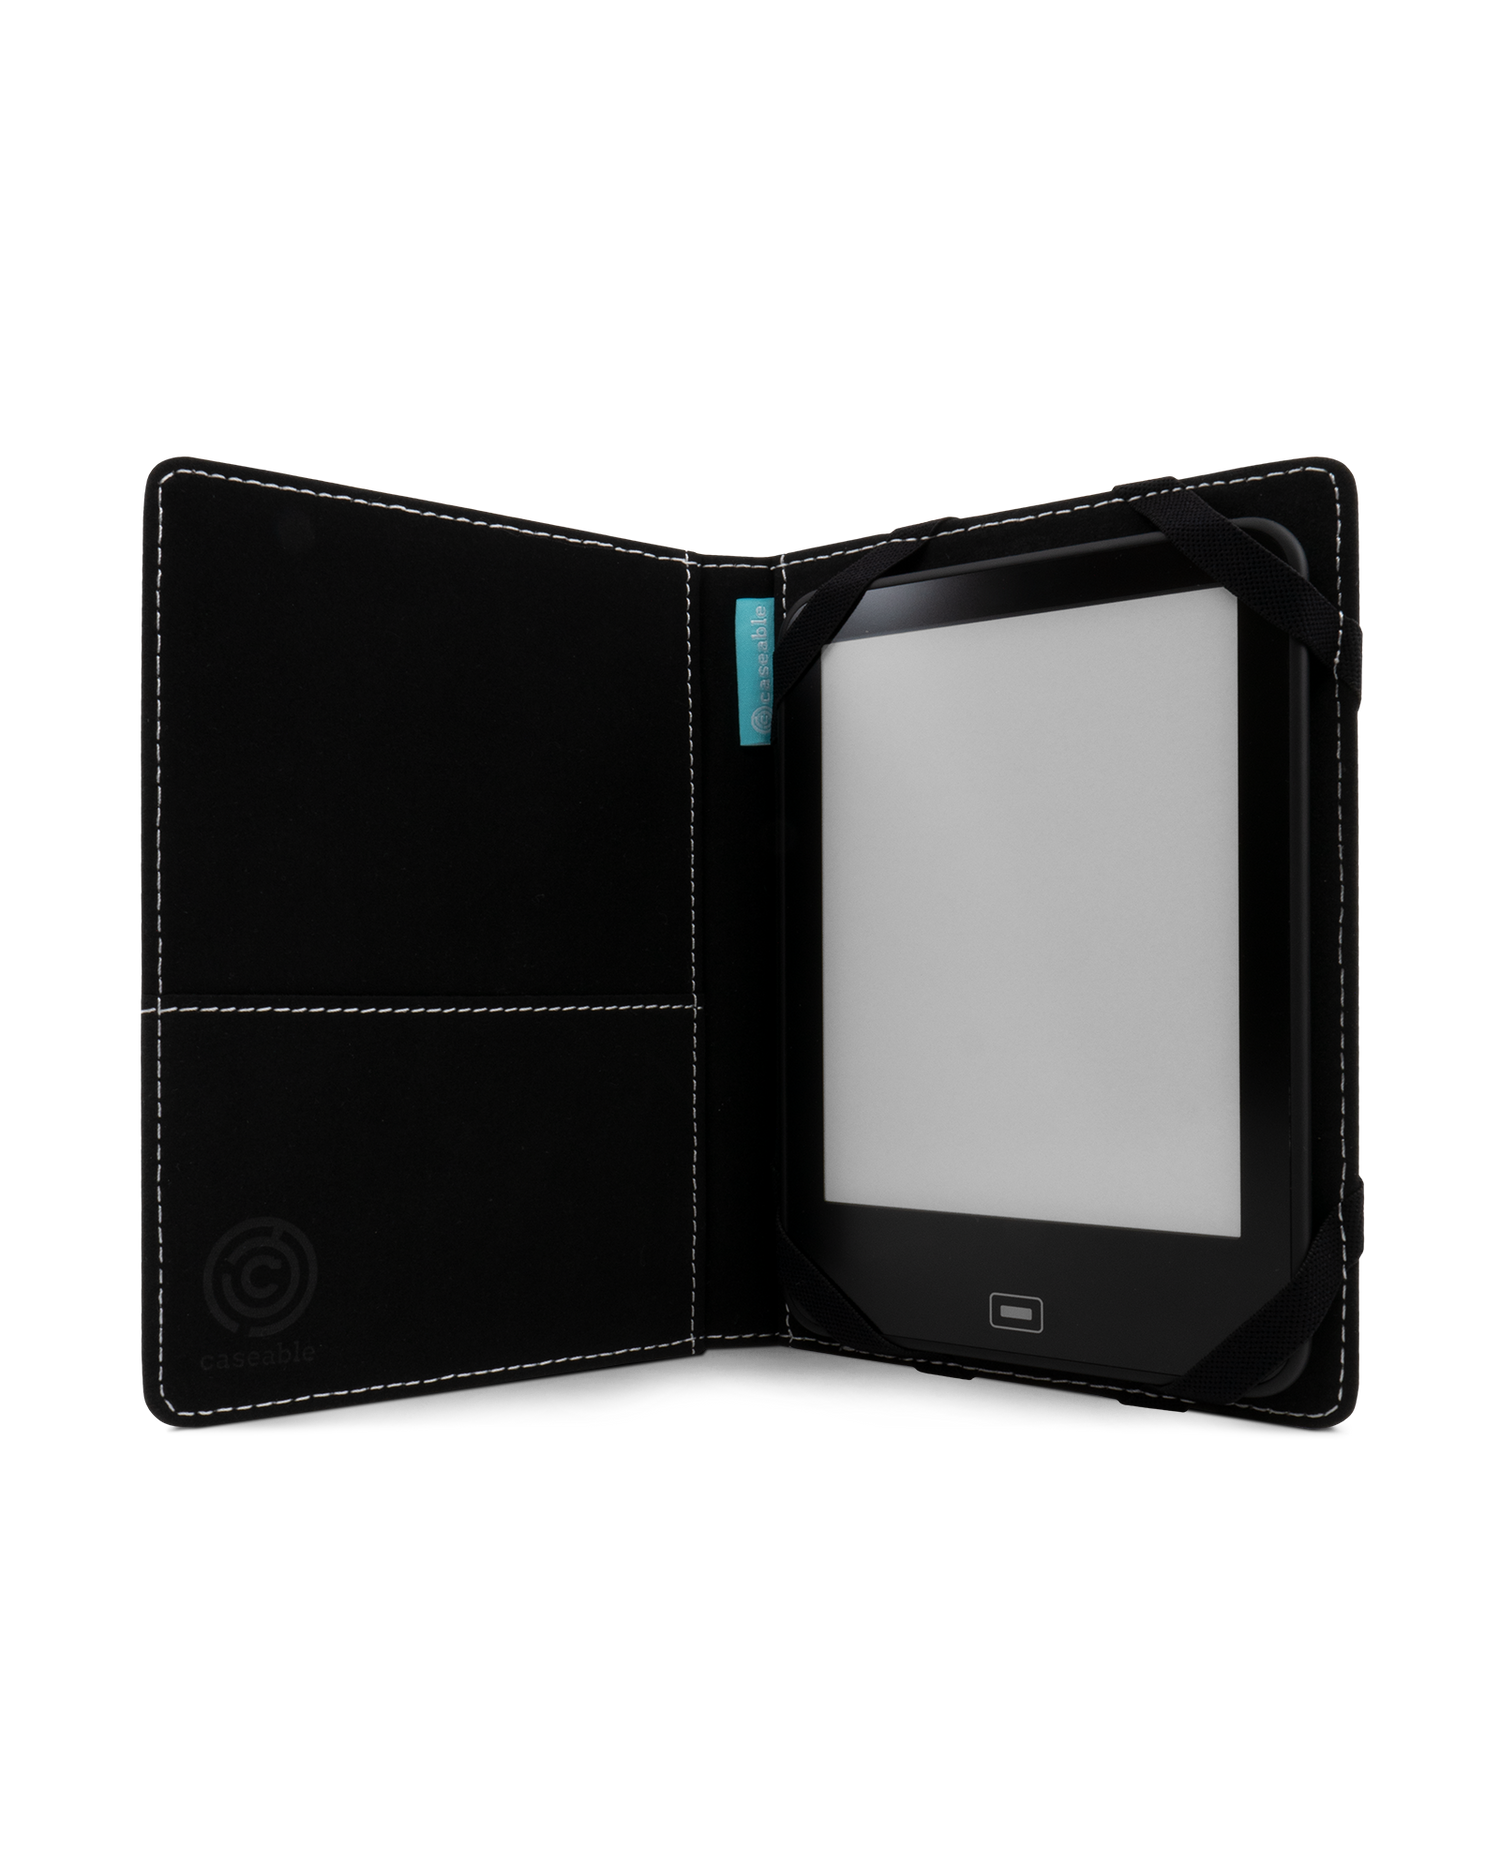 Night Moves eReader Case S: Opened interior view